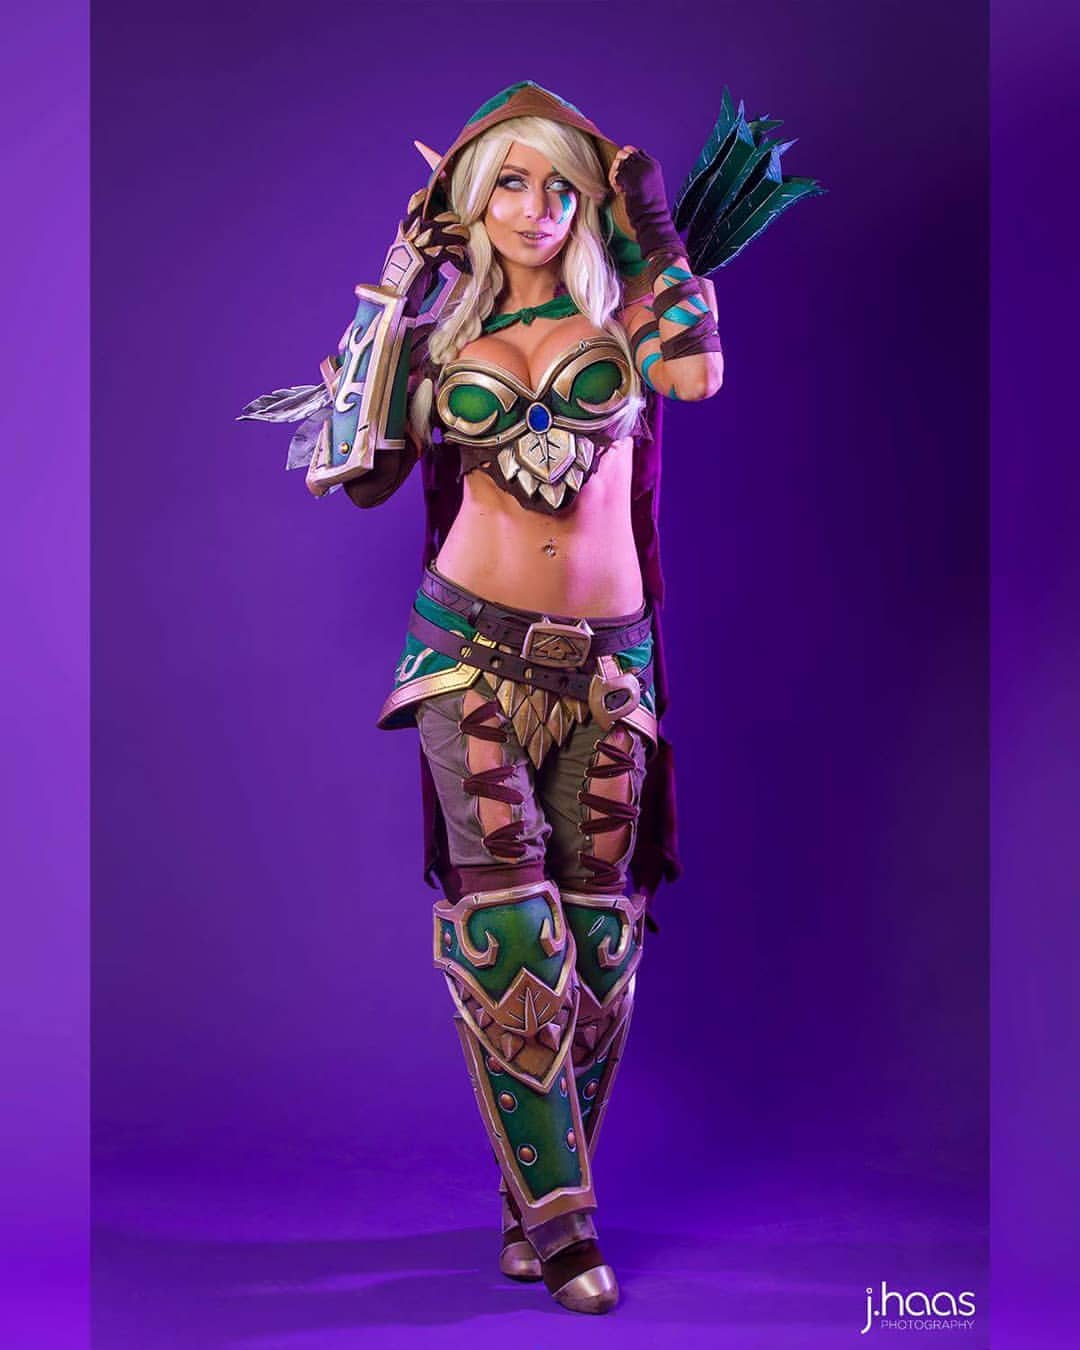 49 Hot Pictures Of Alleria Windrunner From World Of Warcraft Will Make Every Fan’s Day A Win | Best Of Comic Books